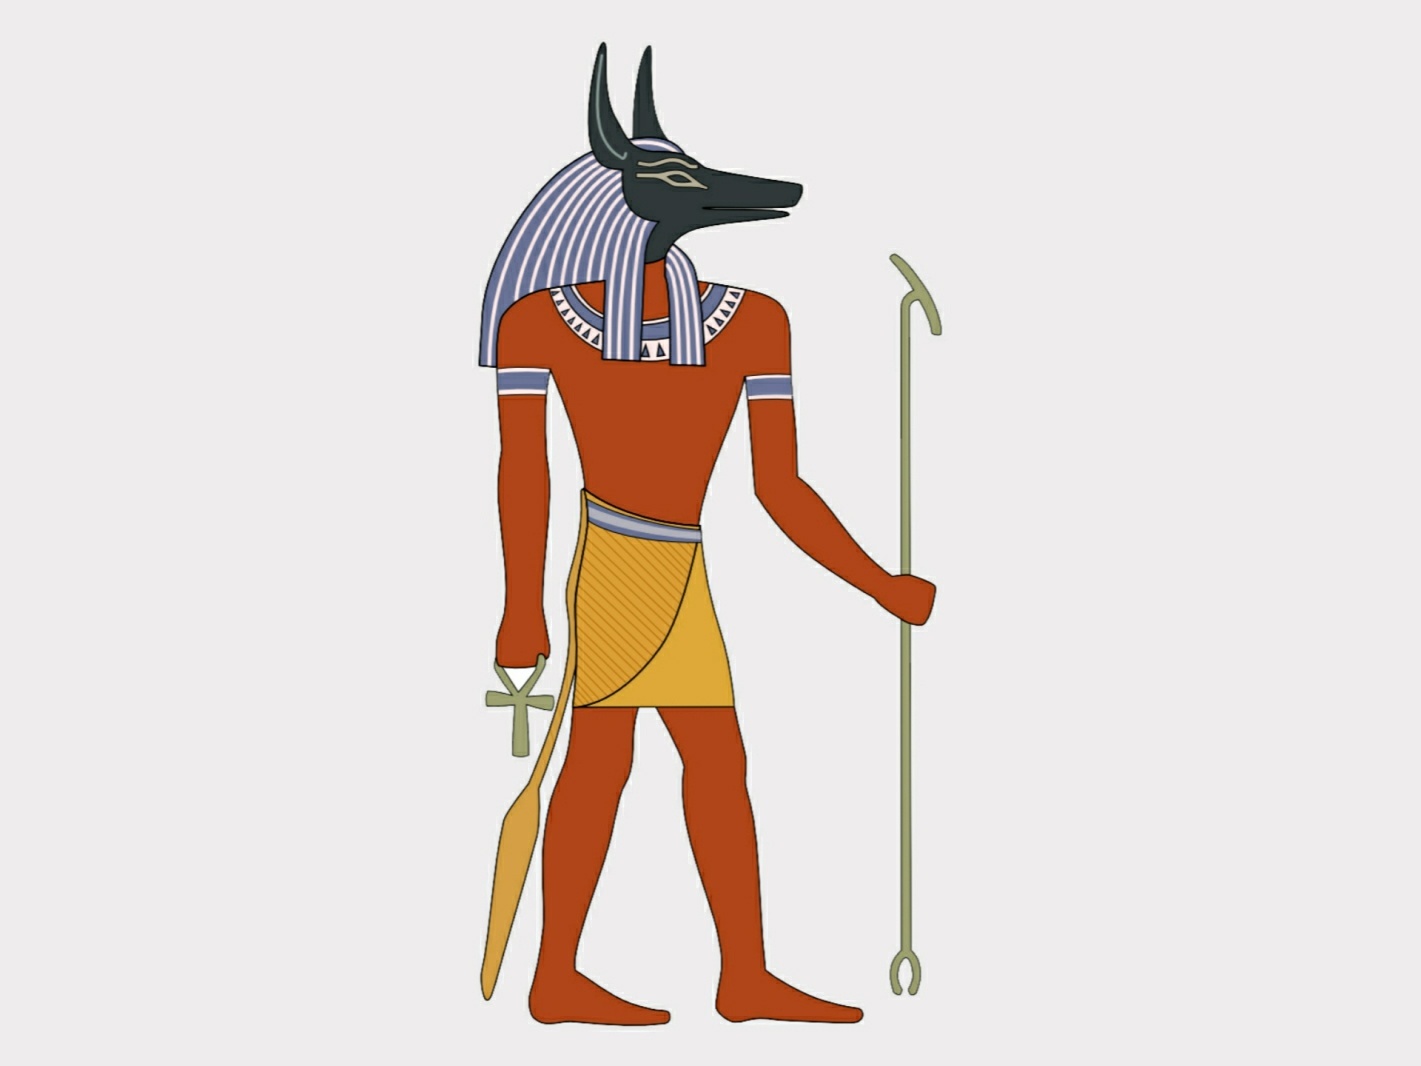 Self made picture of ancient Egyptian god Anubis. Made by Ningyou